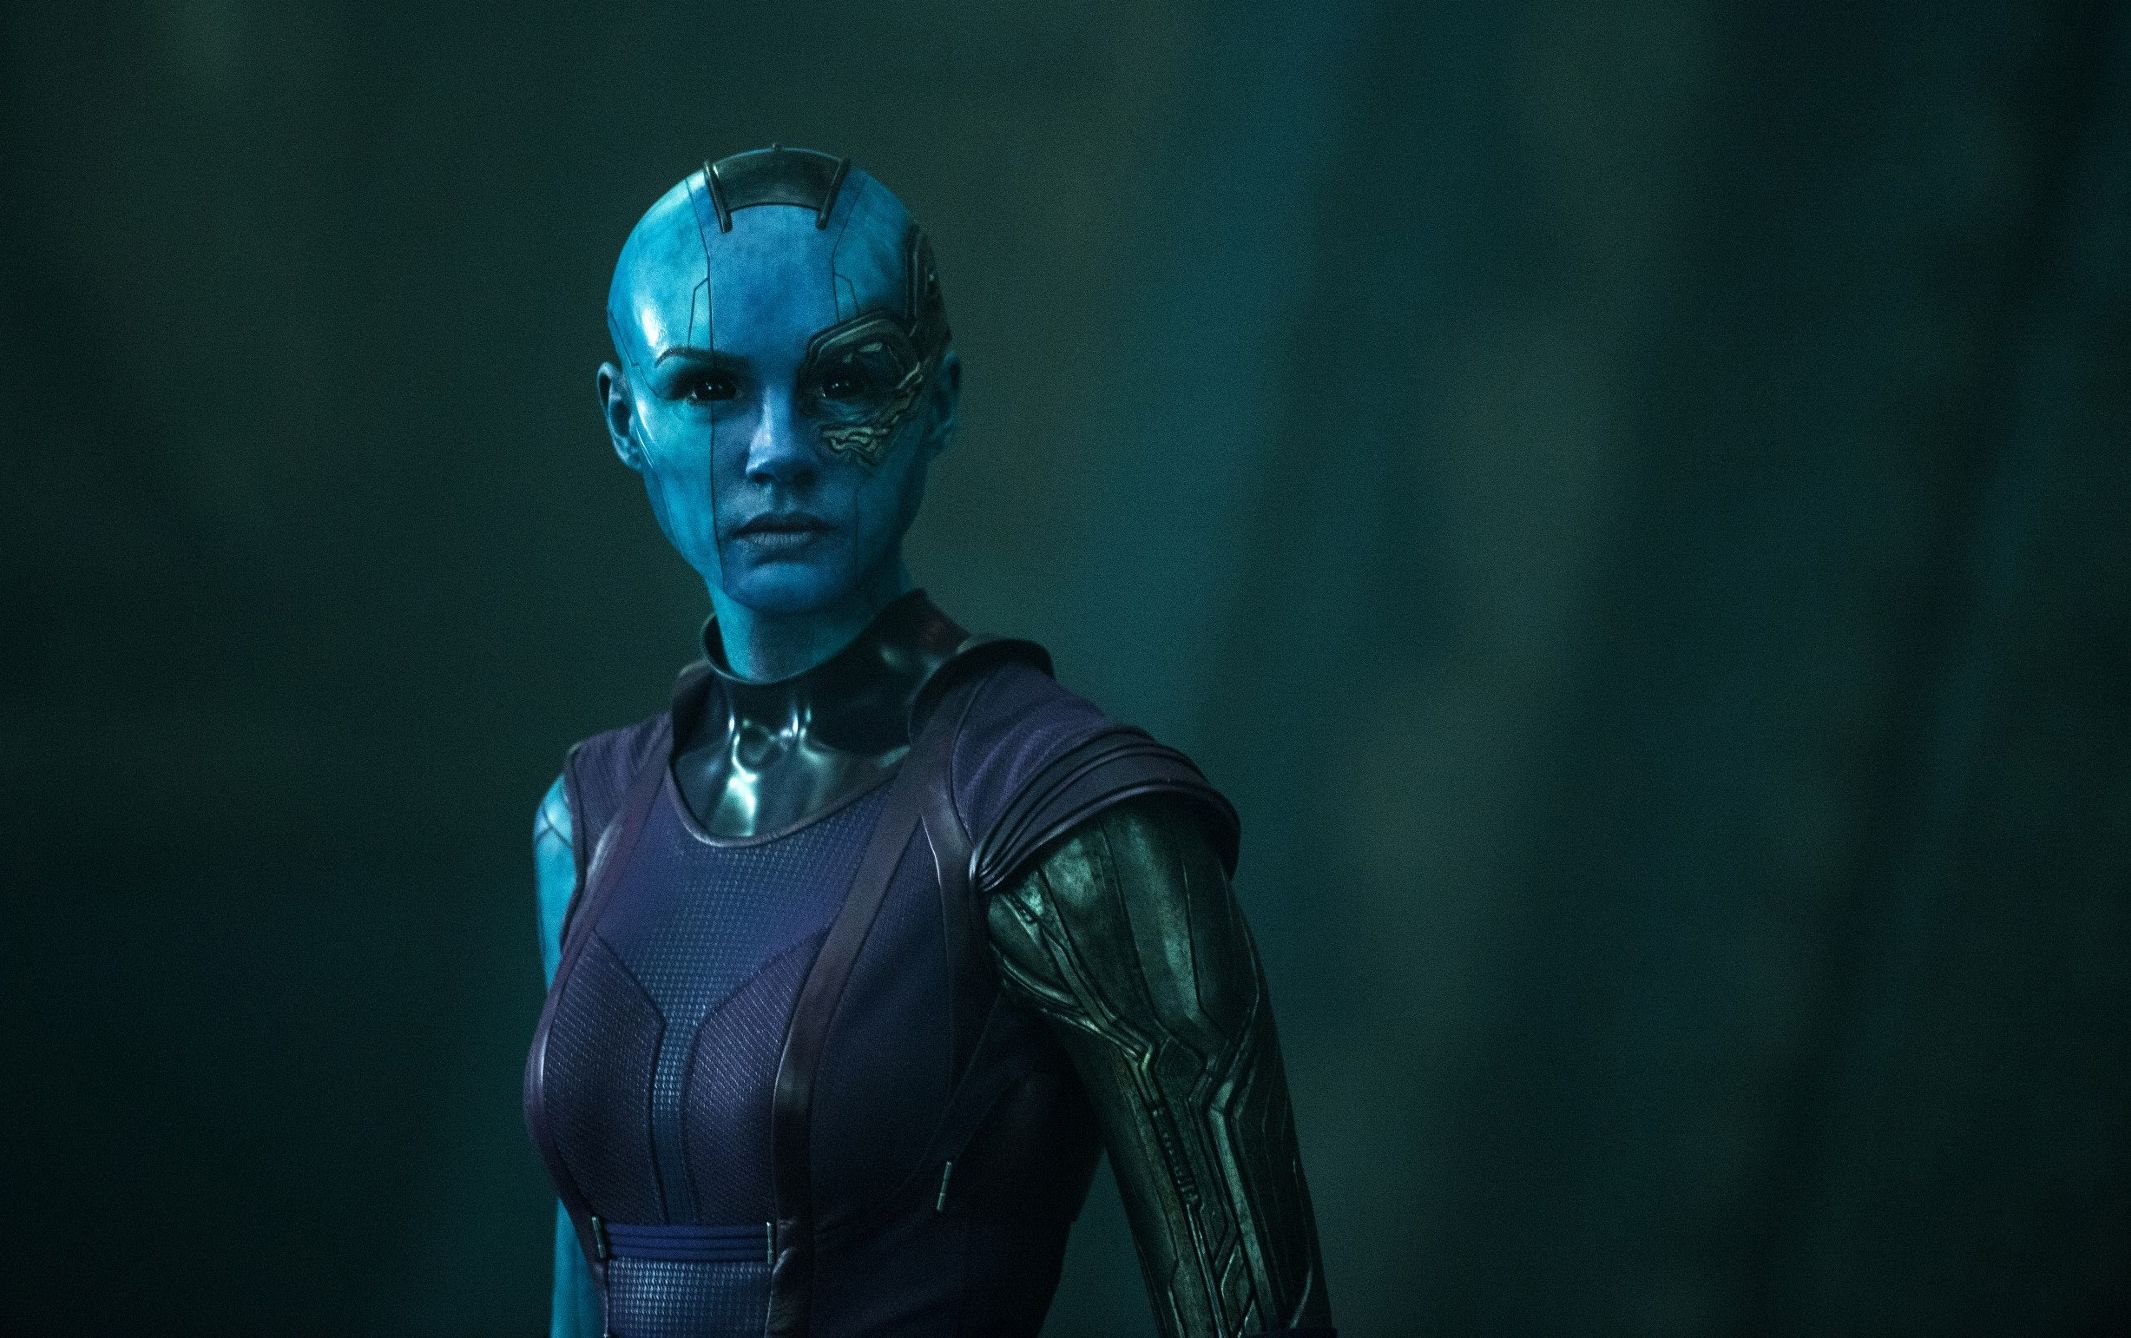 Space pirate Nebula in the &#039;Guardians of the Galaxy&#039;